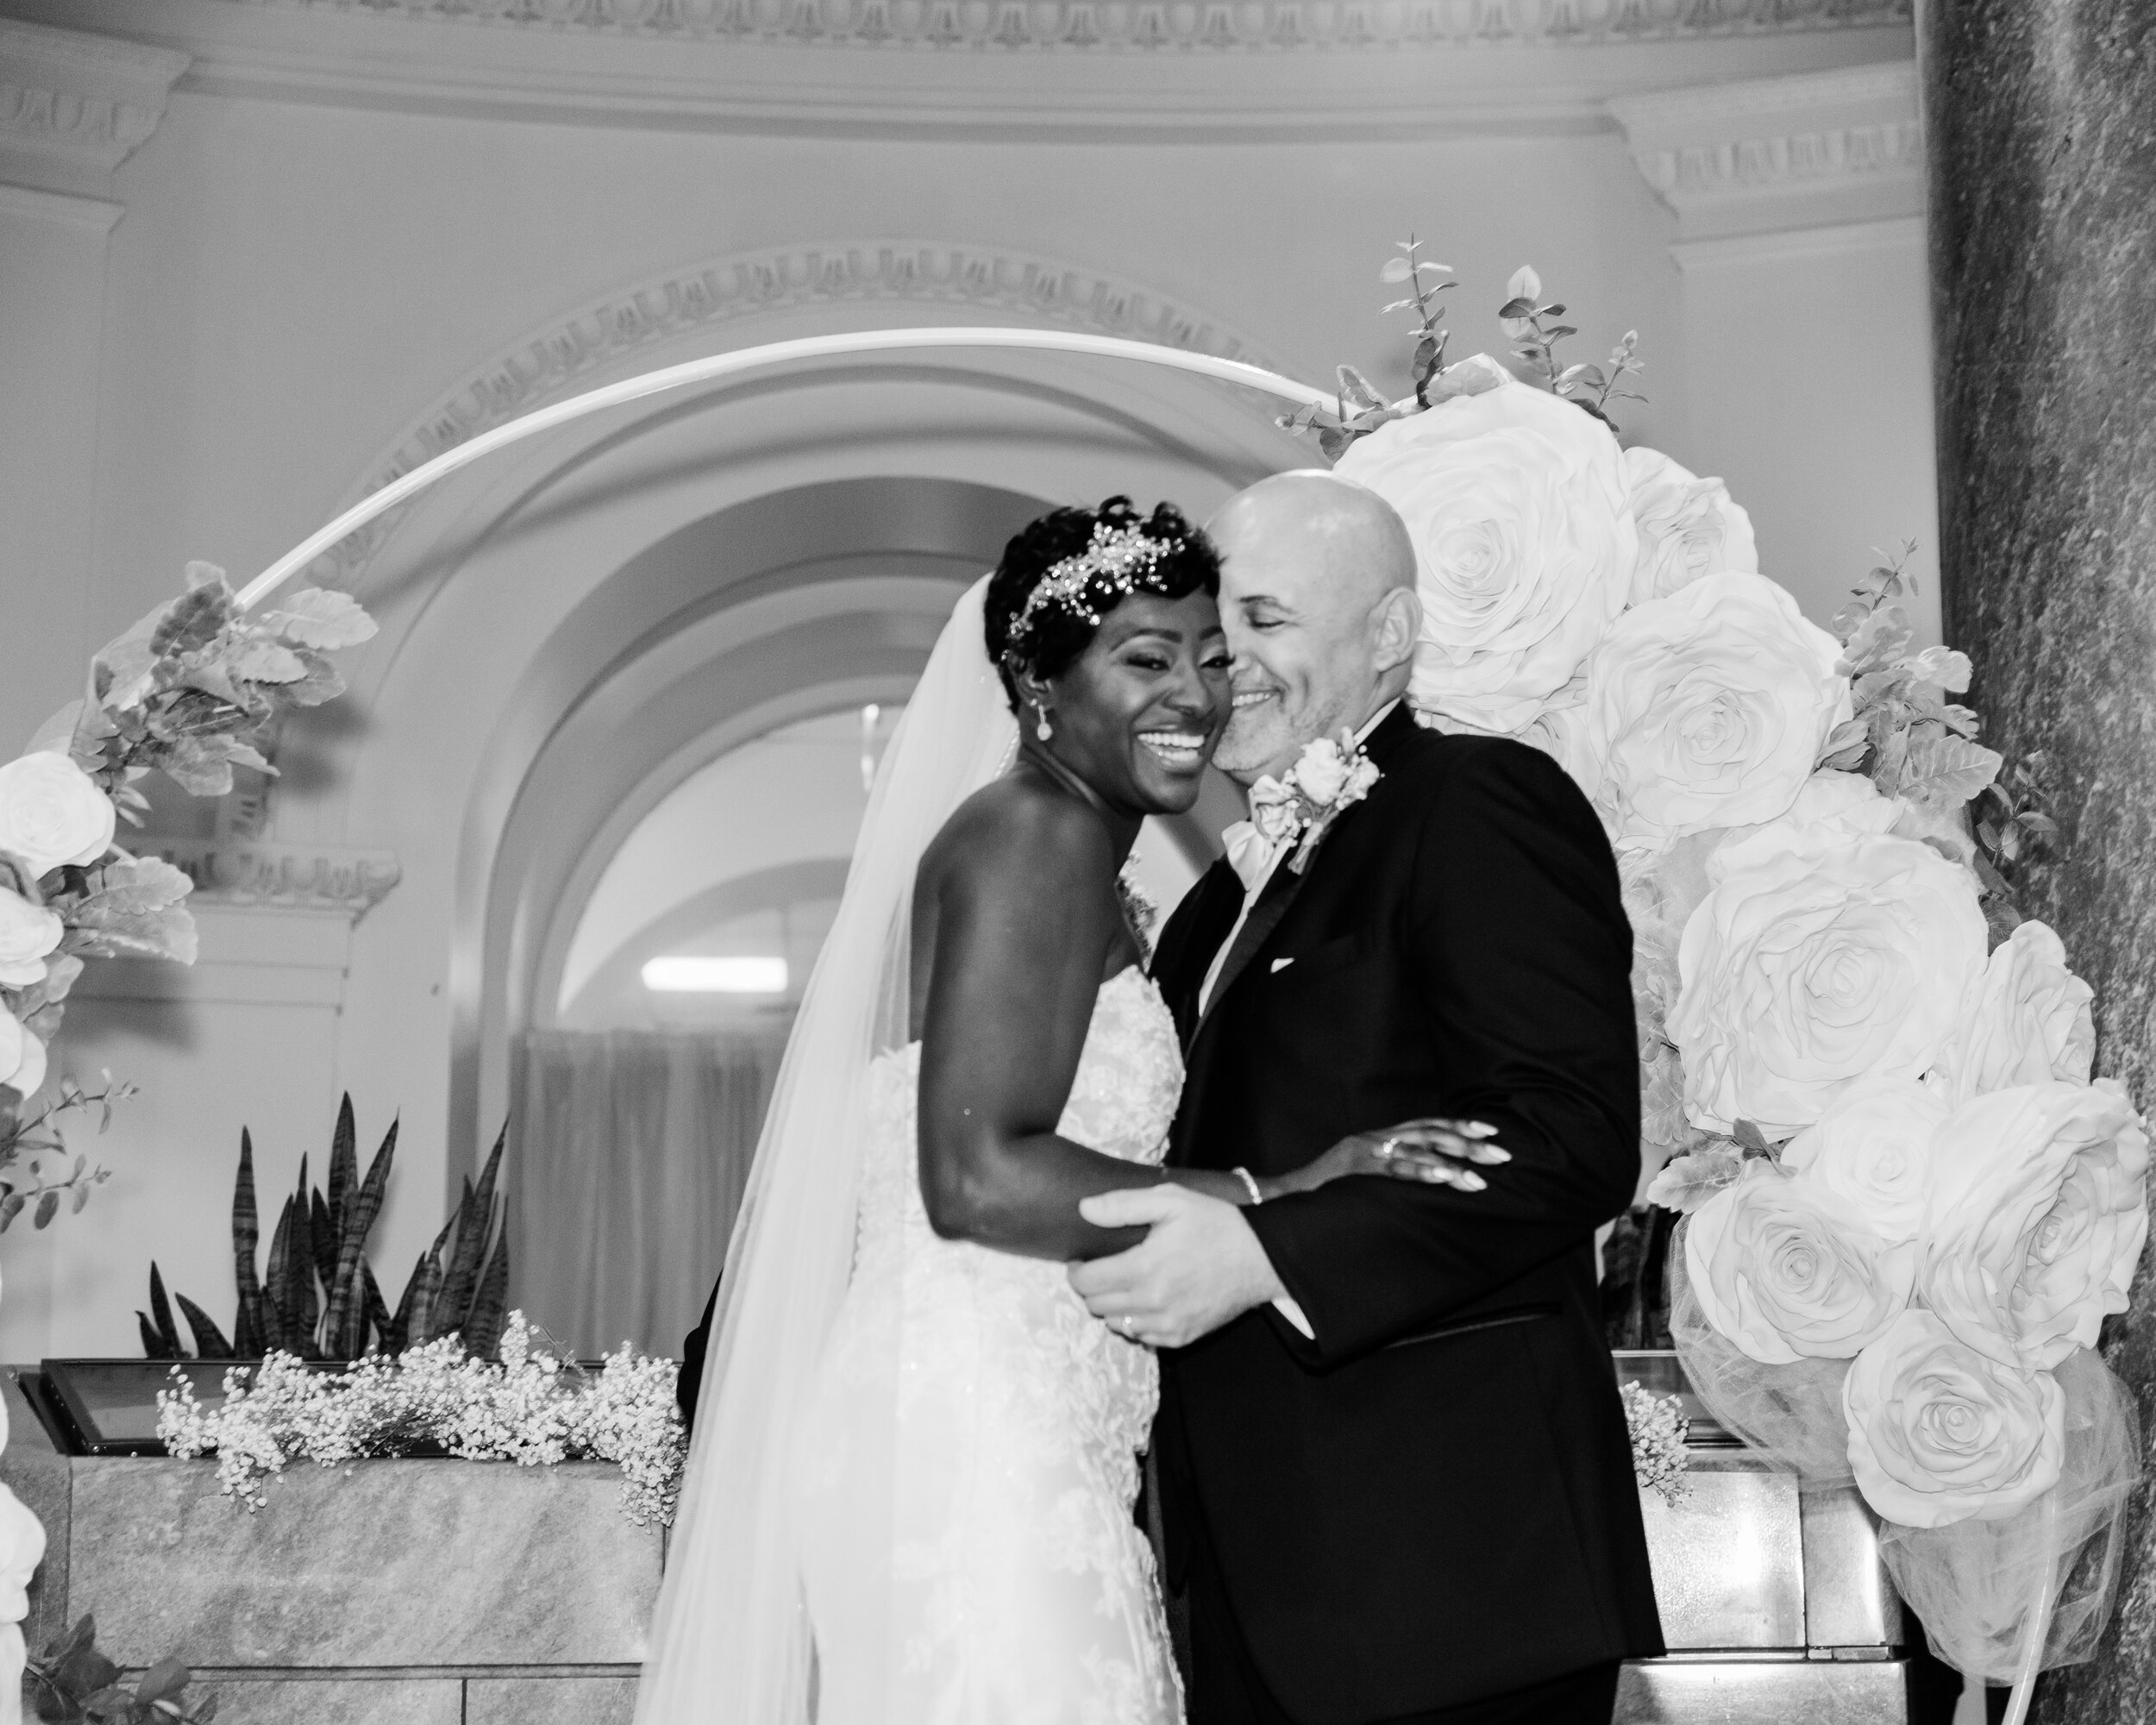 get married in baltimore city hall shot by megapixels media biracial couple wedding photographers maryland-75.jpg